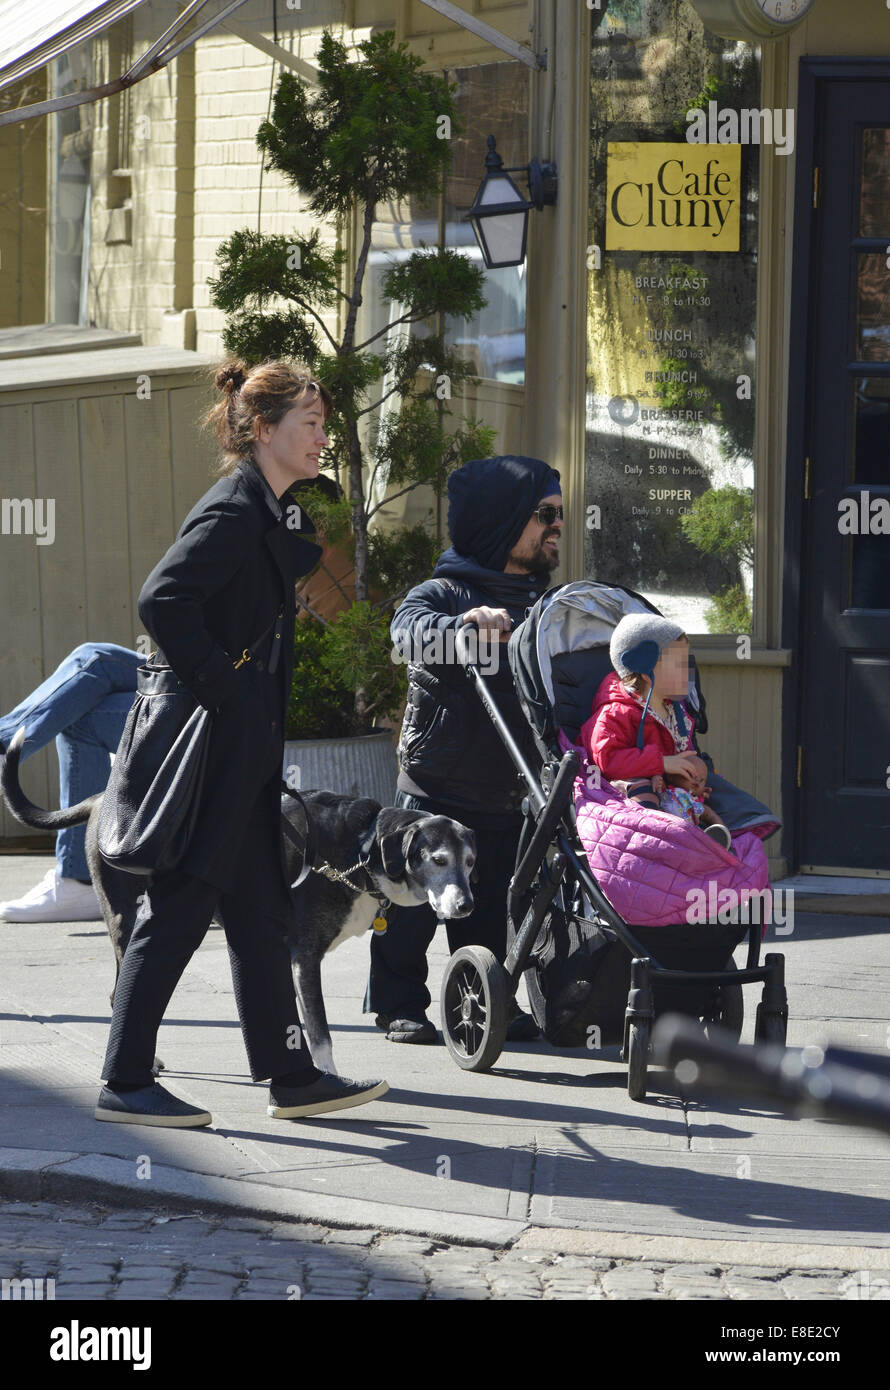 Peter Dinklage and family out and about in Manhattan  Featuring: Peter Dinklage,Erica Schmidt,Zelig Dinklage Where: New York City, New York, United States When: 03 Apr 2014 Stock Photo